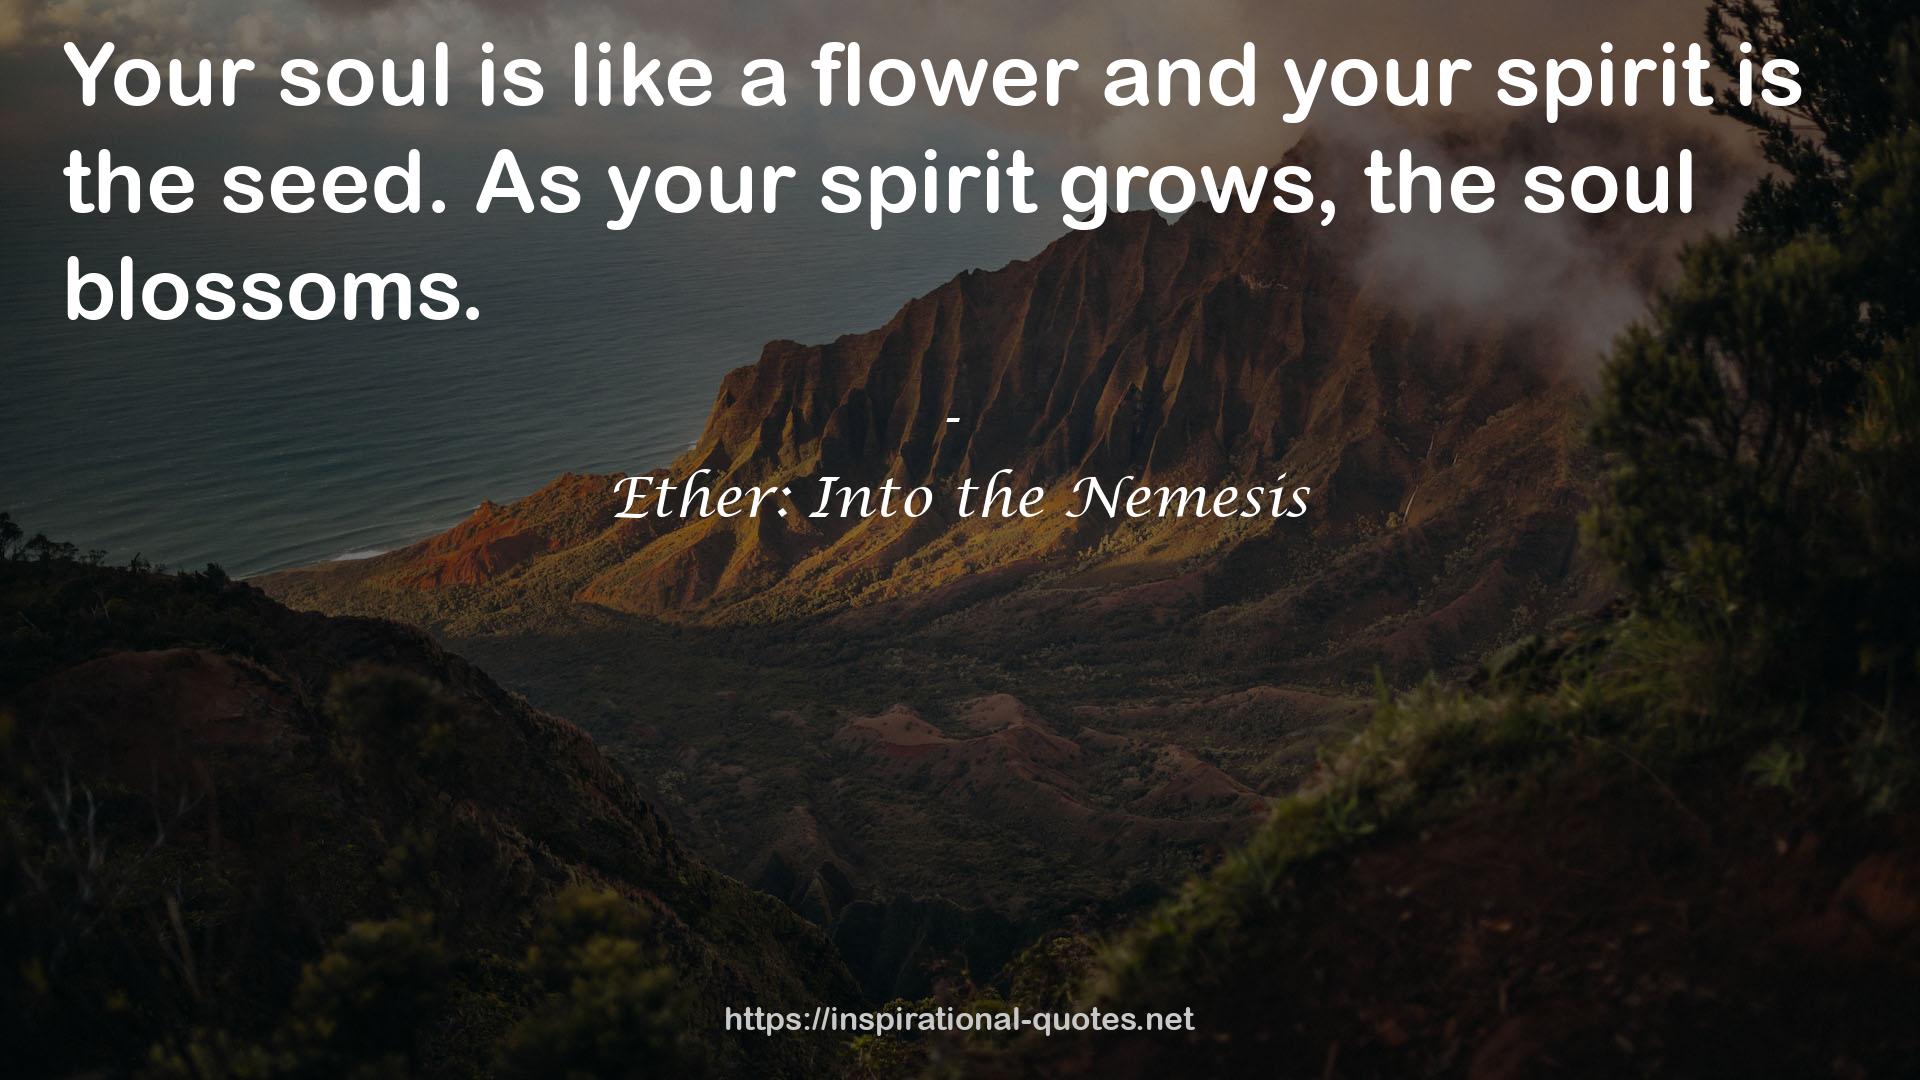 Ether: Into the Nemesis QUOTES